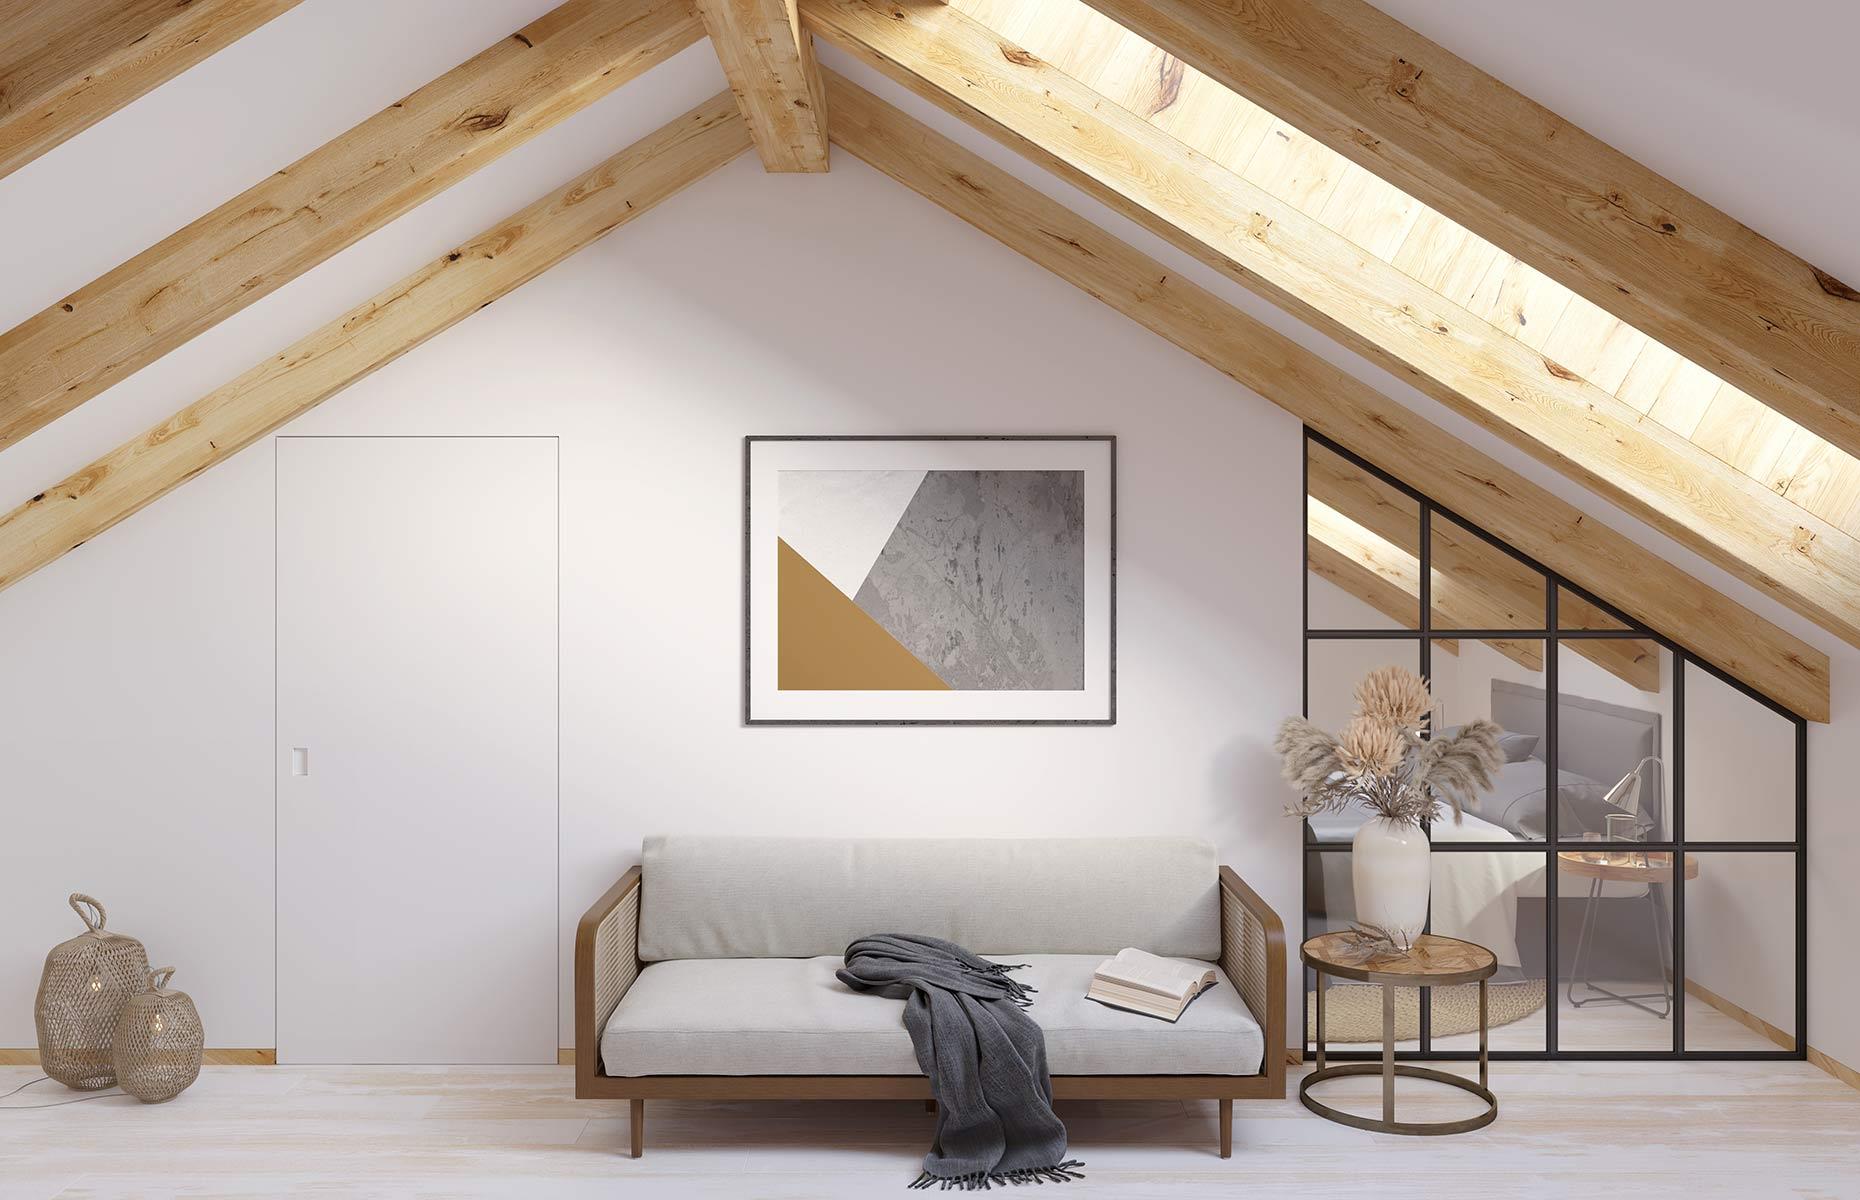 <p>The beauty of extending into the attic is that it doesn’t increase the footprint of your house, so it won’t impede on your outdoor space. Start by deciding what you want to use the <a href="https://www.loveproperty.com/news/122896/how-much-does-a-loft-conversion-cost">loft conversion</a> for. If light levels and views are good, you could transform your eves into an extra living space or bedroom, which could add value, as well as square footage, to your home.</p>